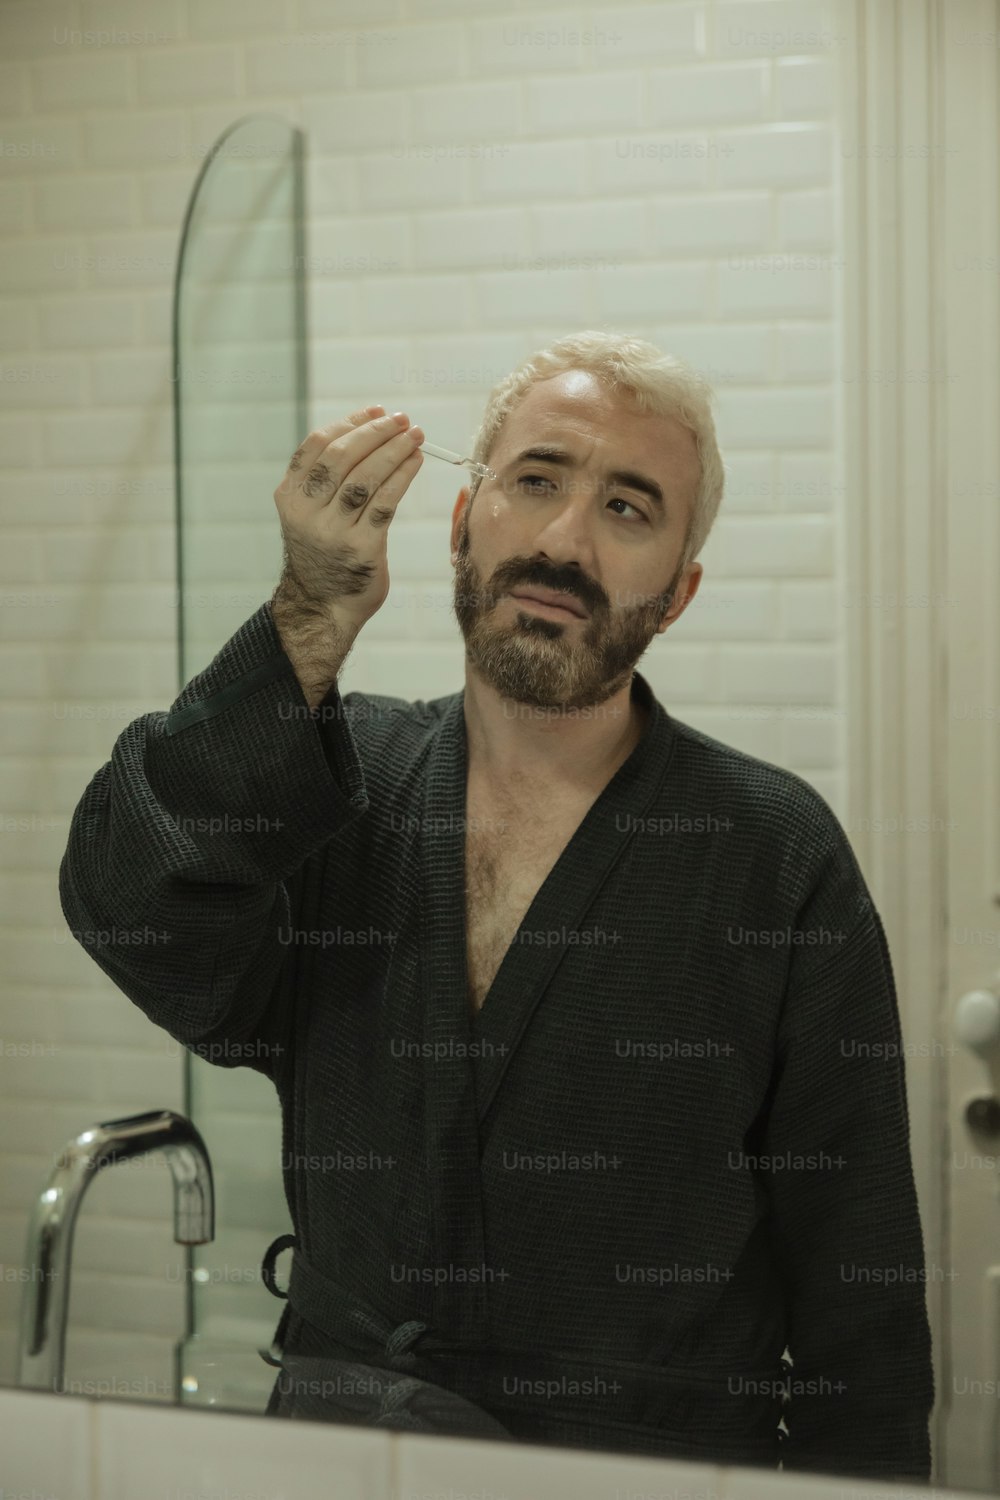 a man is brushing his teeth in front of a mirror